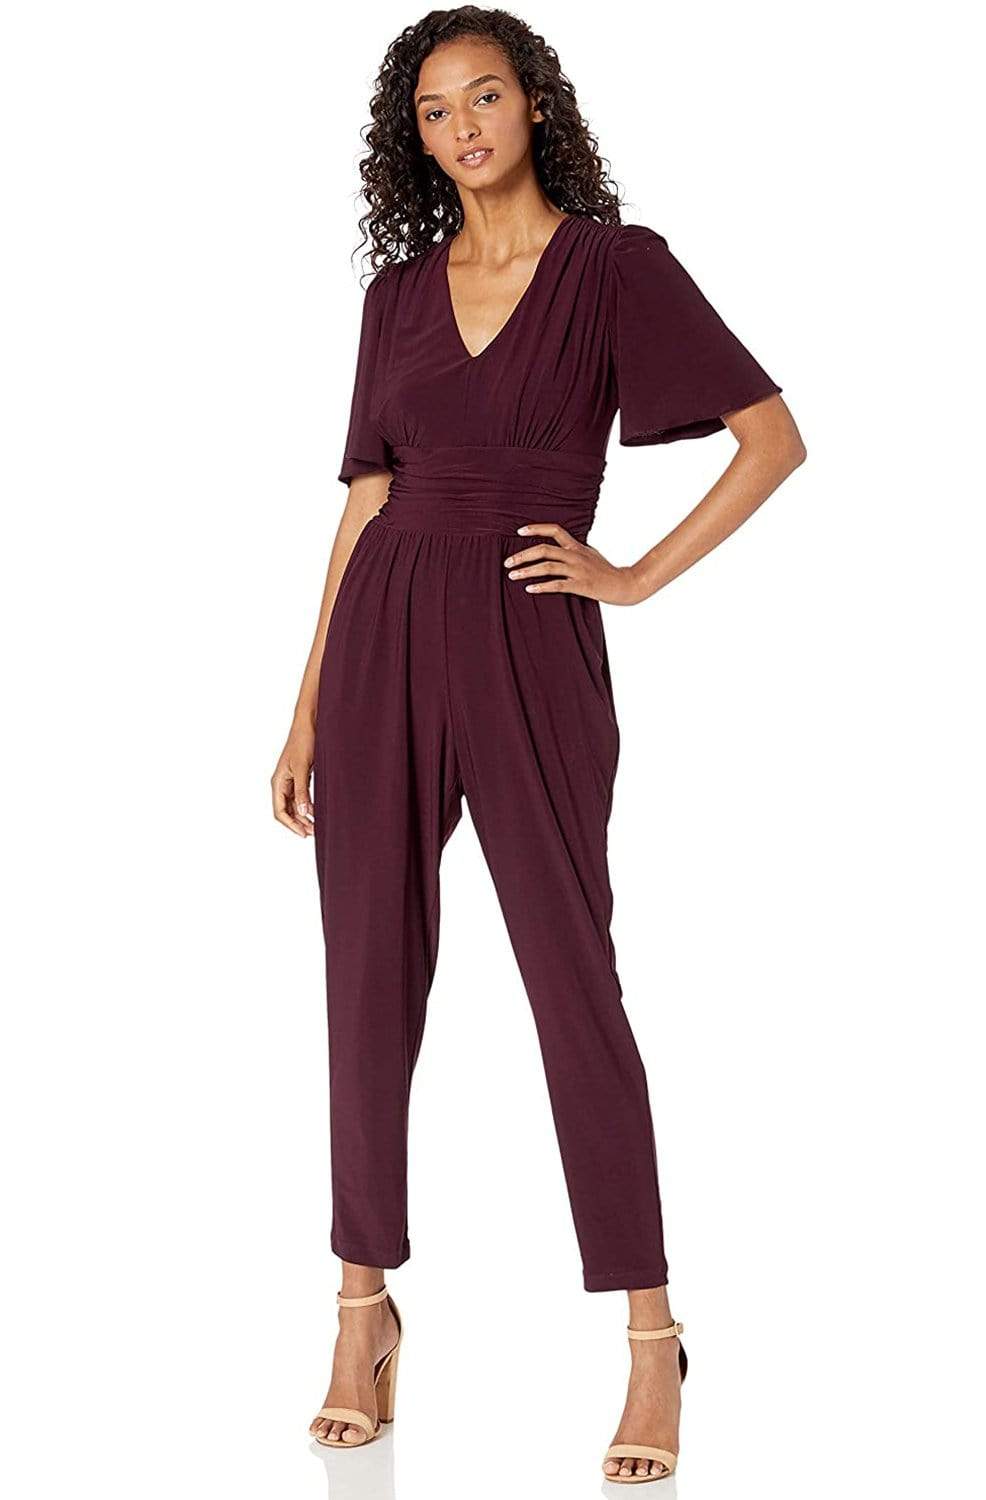 Image of Taylor - 1564M Short Sleeve Ruched Tapering Jumpsuit